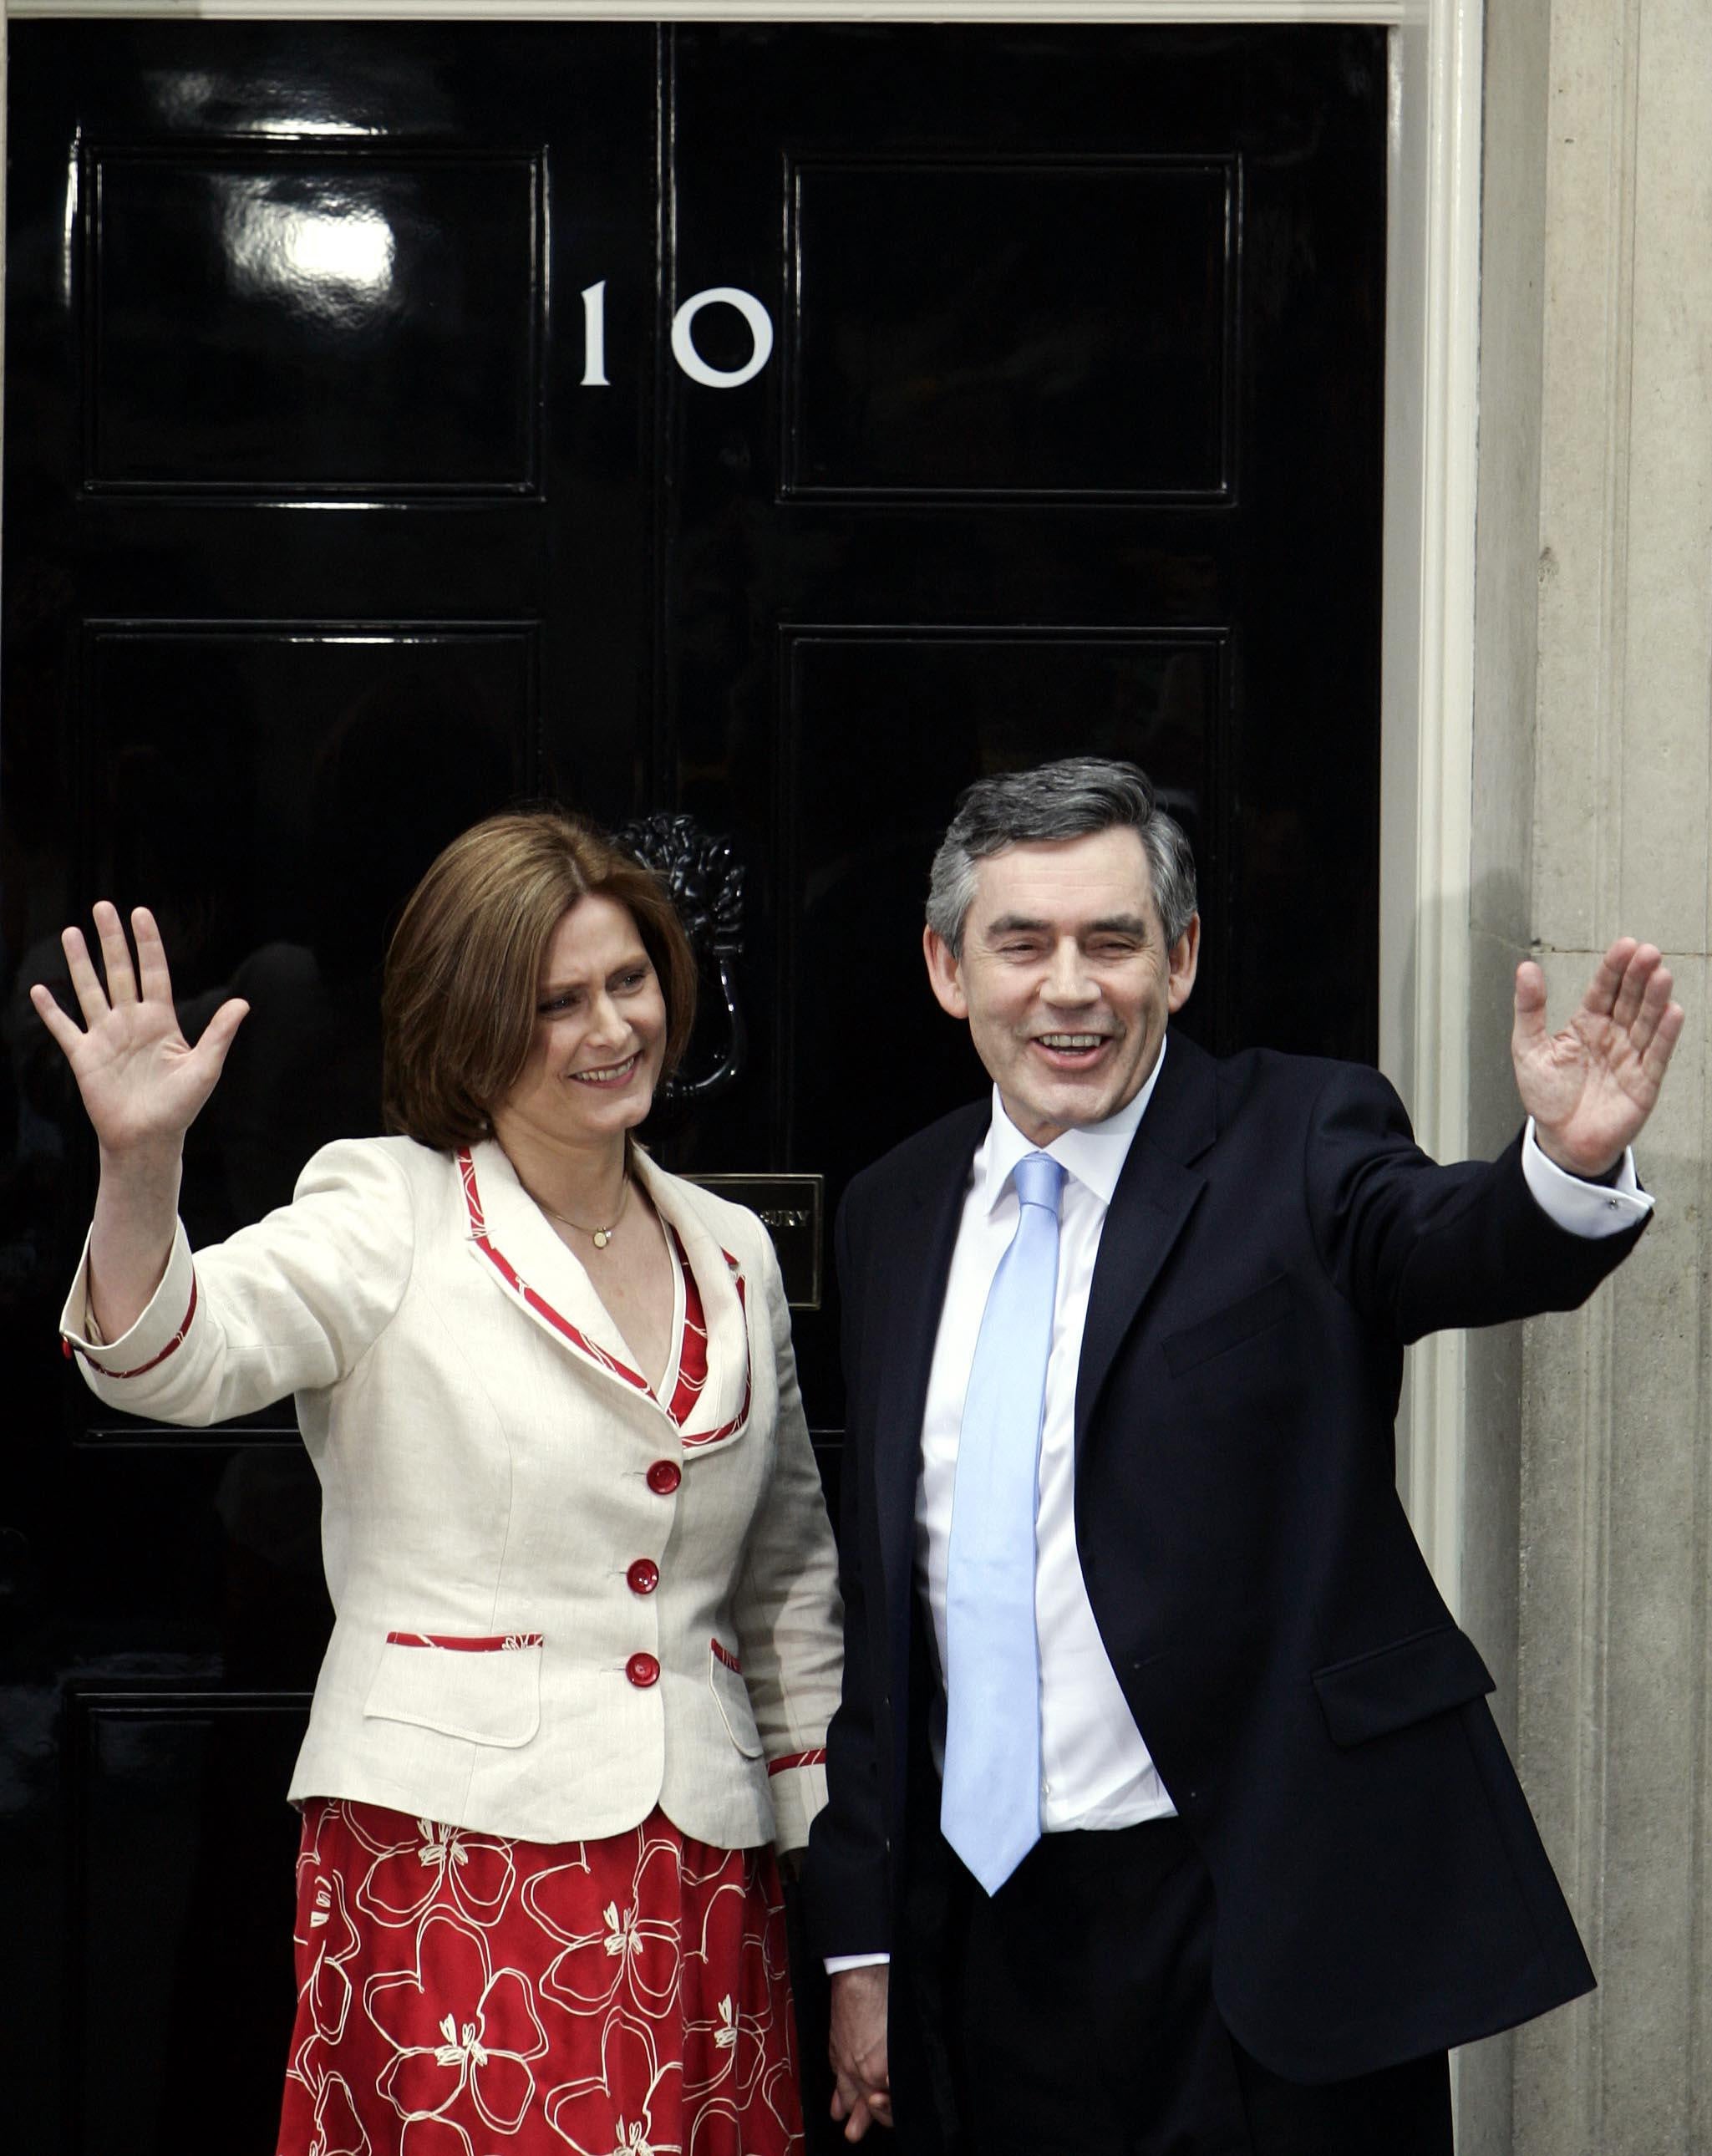 Brown’s tenure in No 10 marked the end of Labour’s domination in Westminster